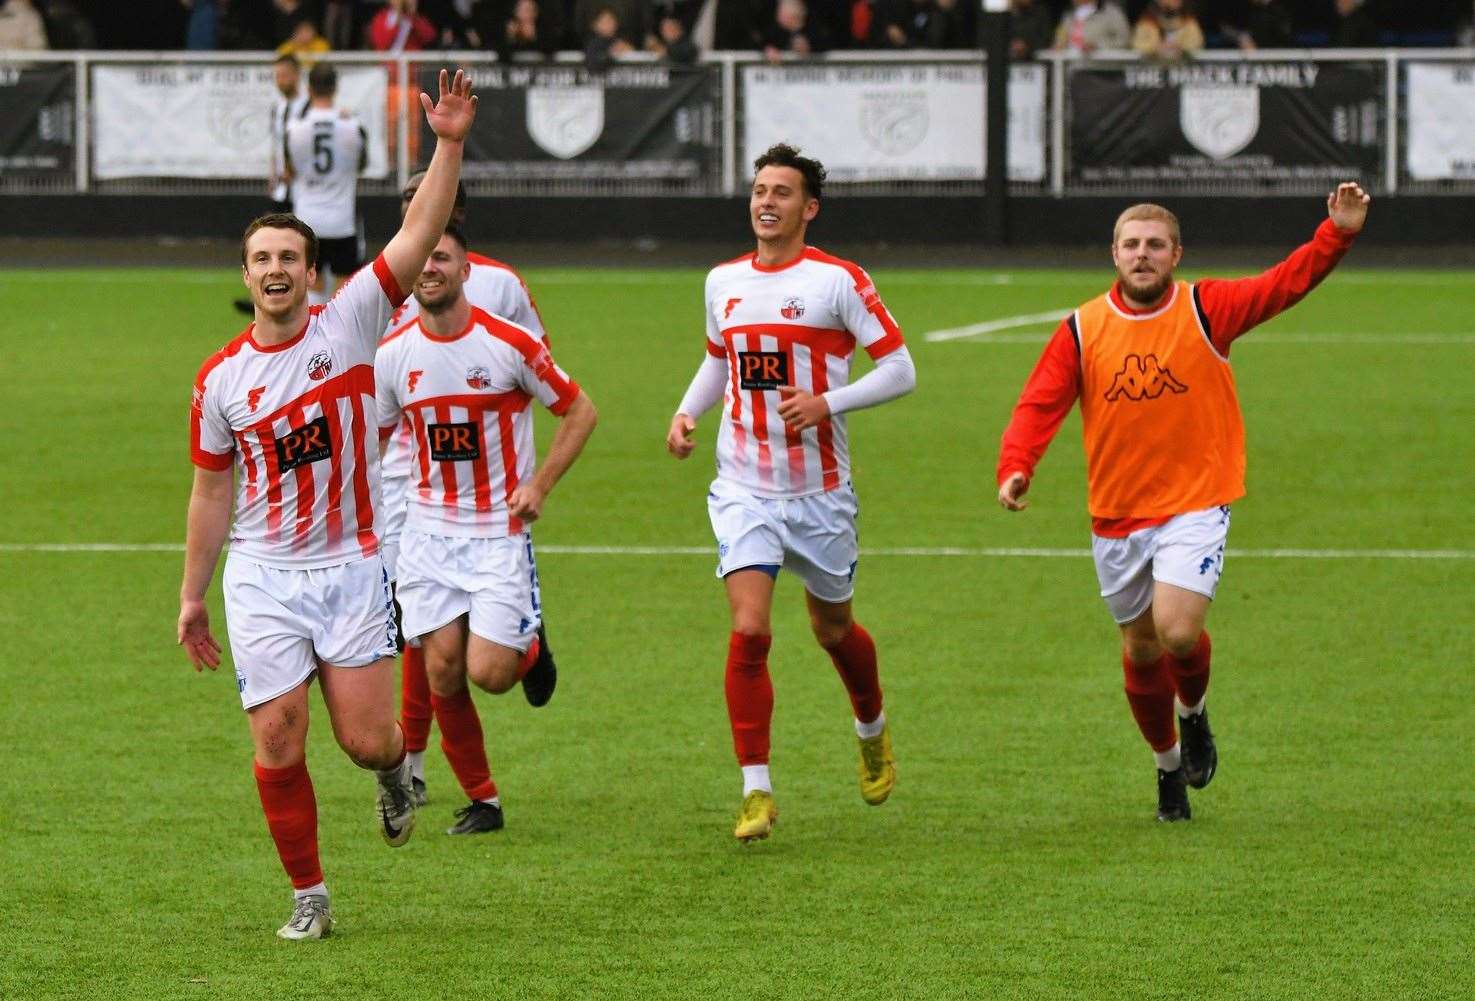 Josh Wisson leads the Sheppey celebrations at full-time Picture: Marc Richards